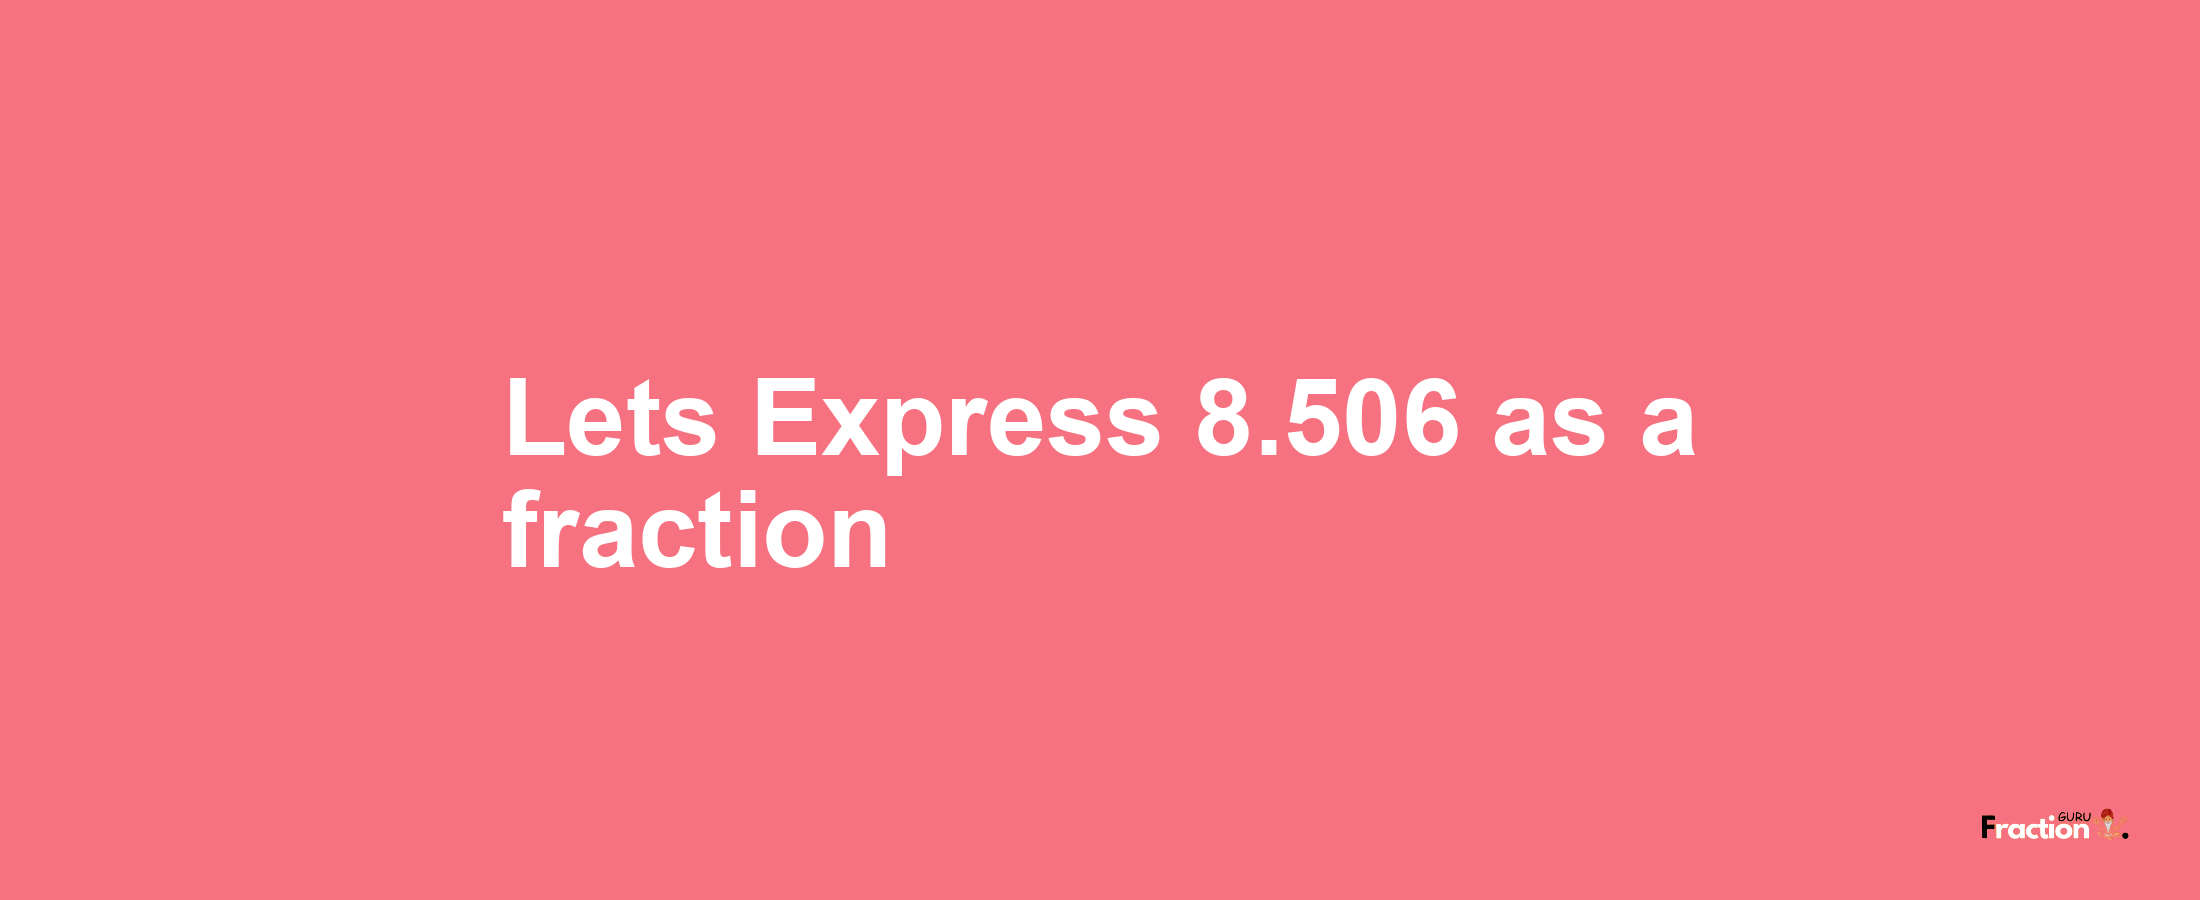 Lets Express 8.506 as afraction